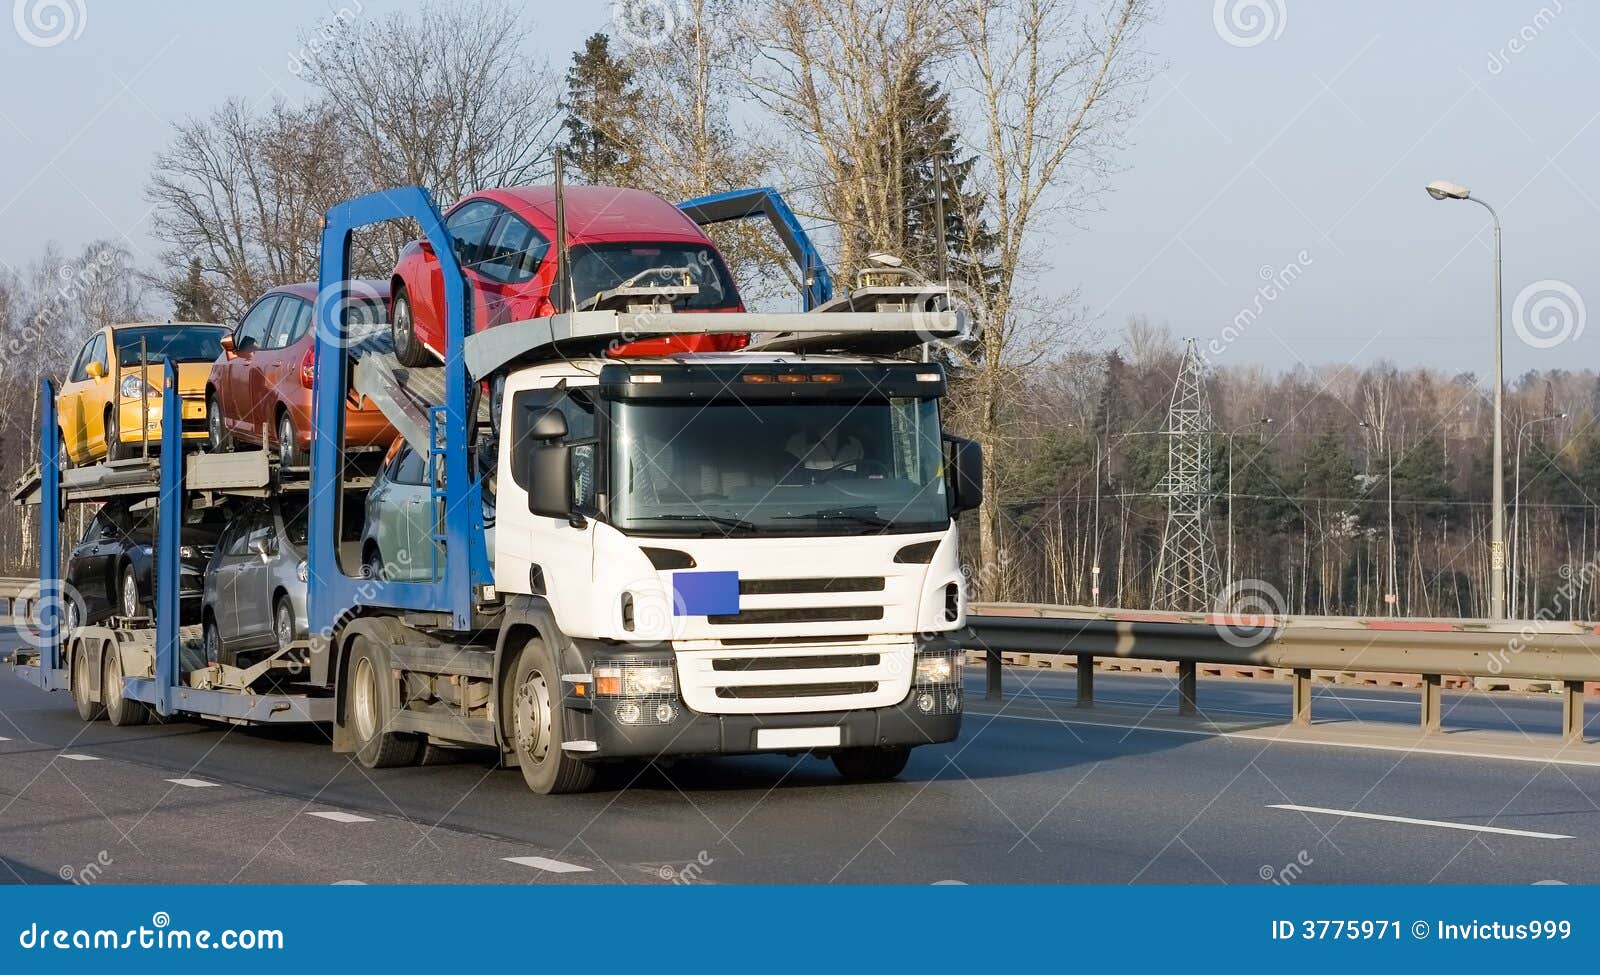 Car Carrier Truck Deliver New Auto Batch To Dealer Stock Image  Image: 3775971